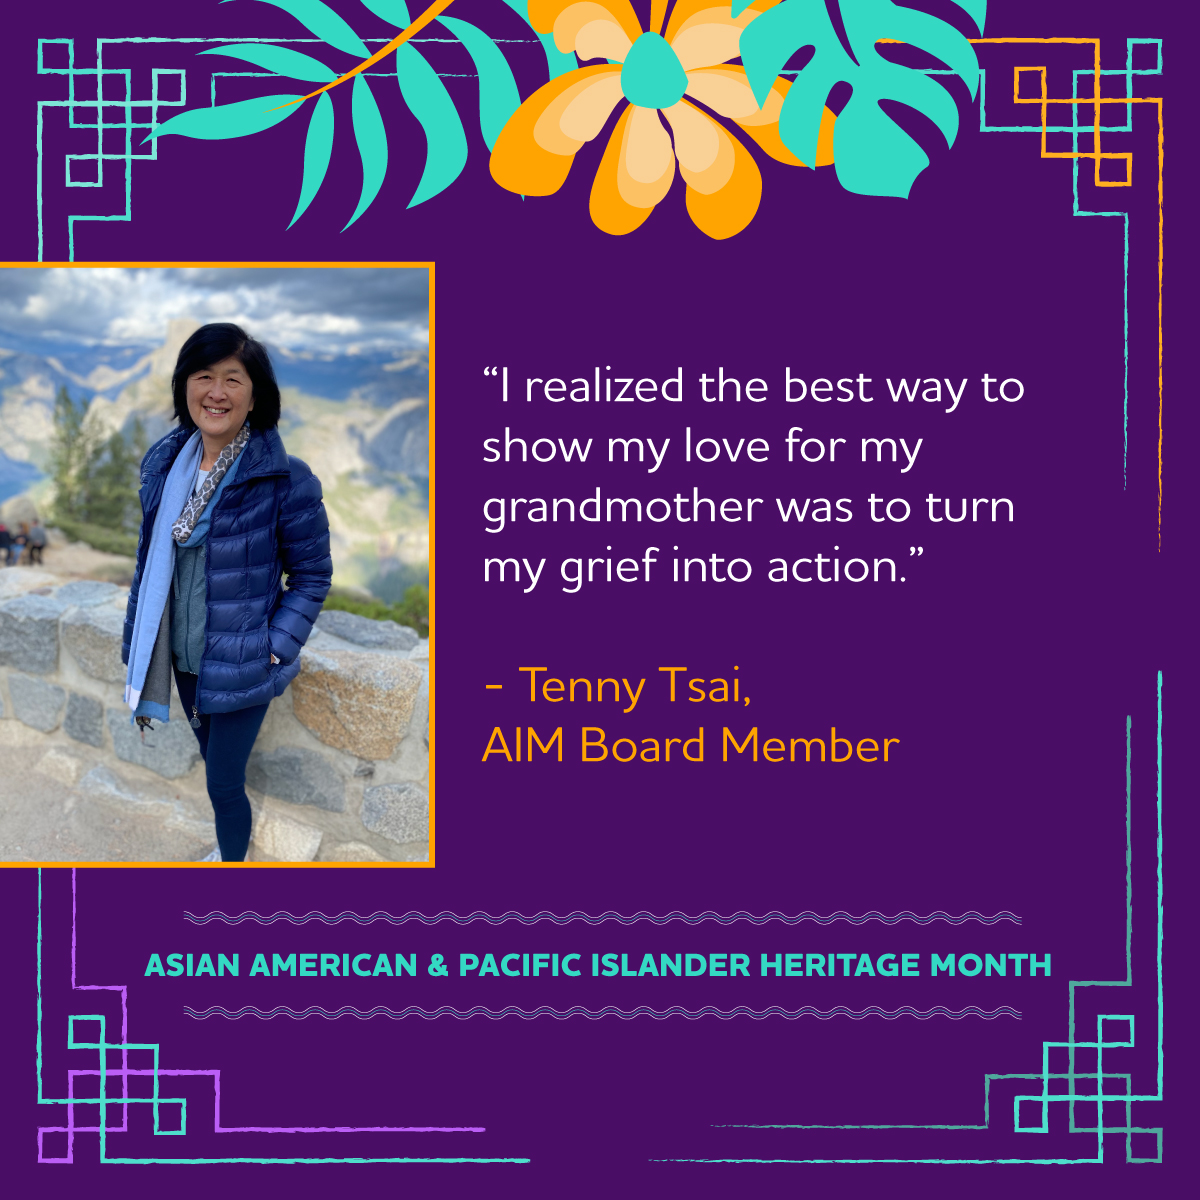 Join us in celebrating advocate and AIM board member Tenny Tsai in honor of #AAPIMonth. Inspired by her grandmother, Tenny has been advocating for the Alzheimer’s and dementia community for nearly 30 years.